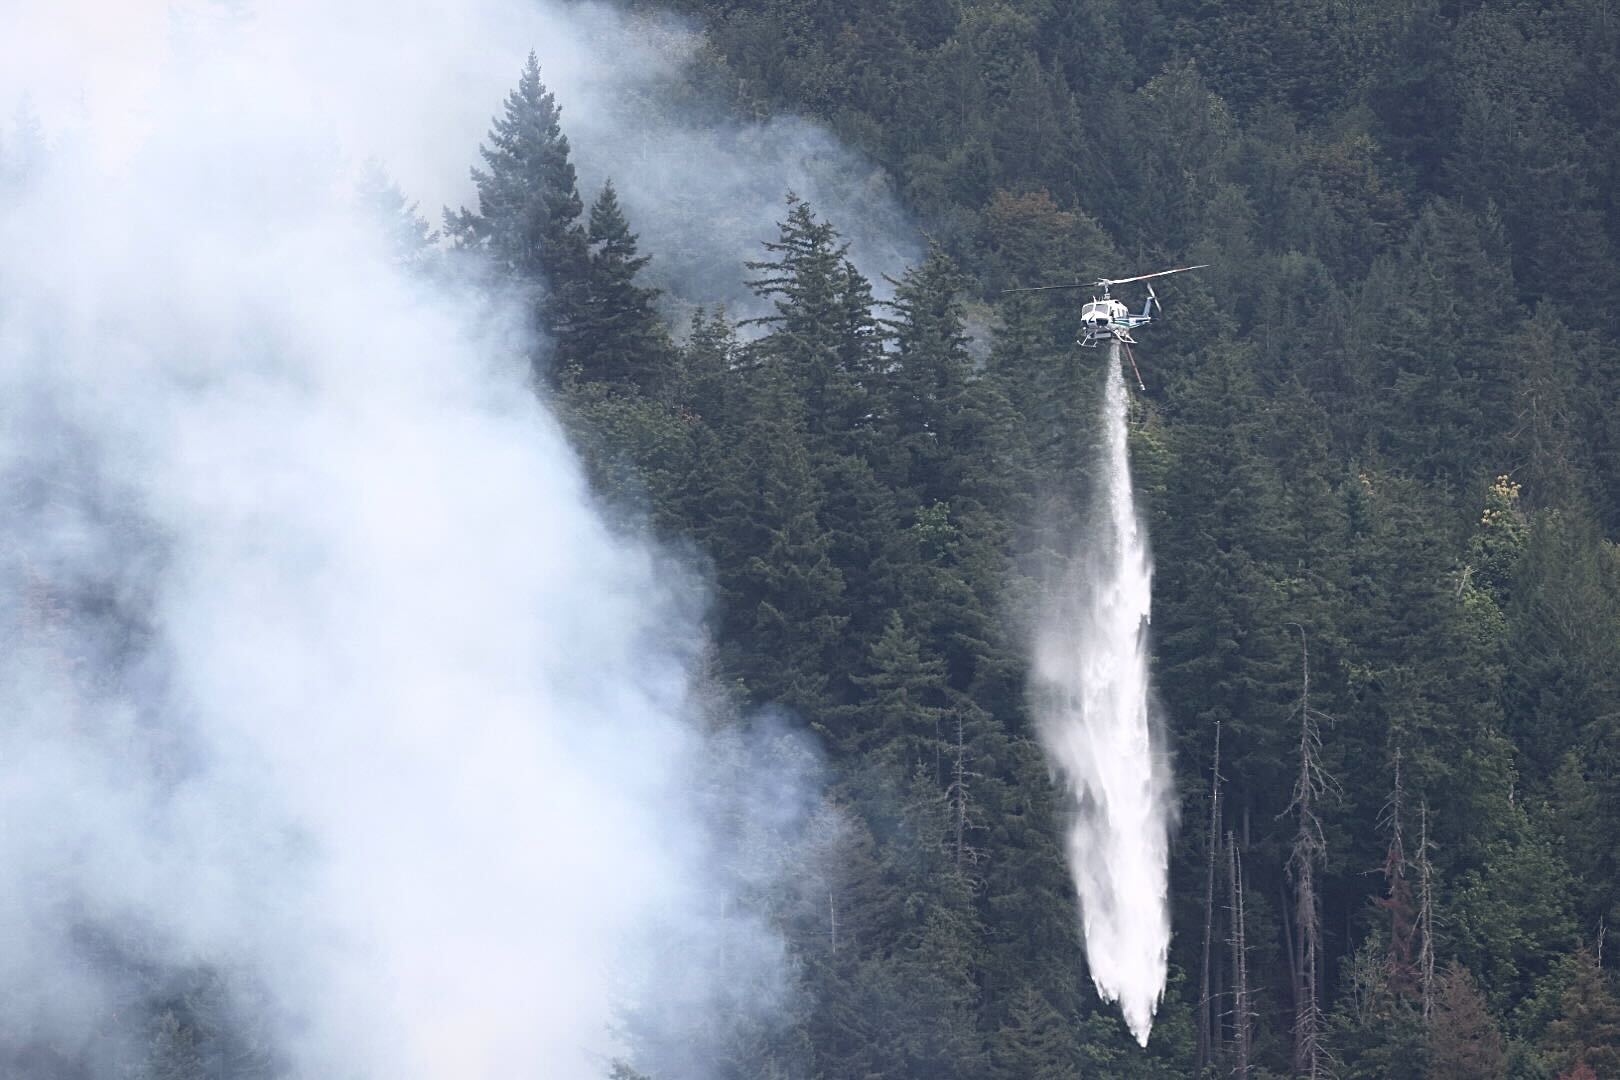 Lake Whatcom Fire 50% contained; helicopter will drop water on north flank